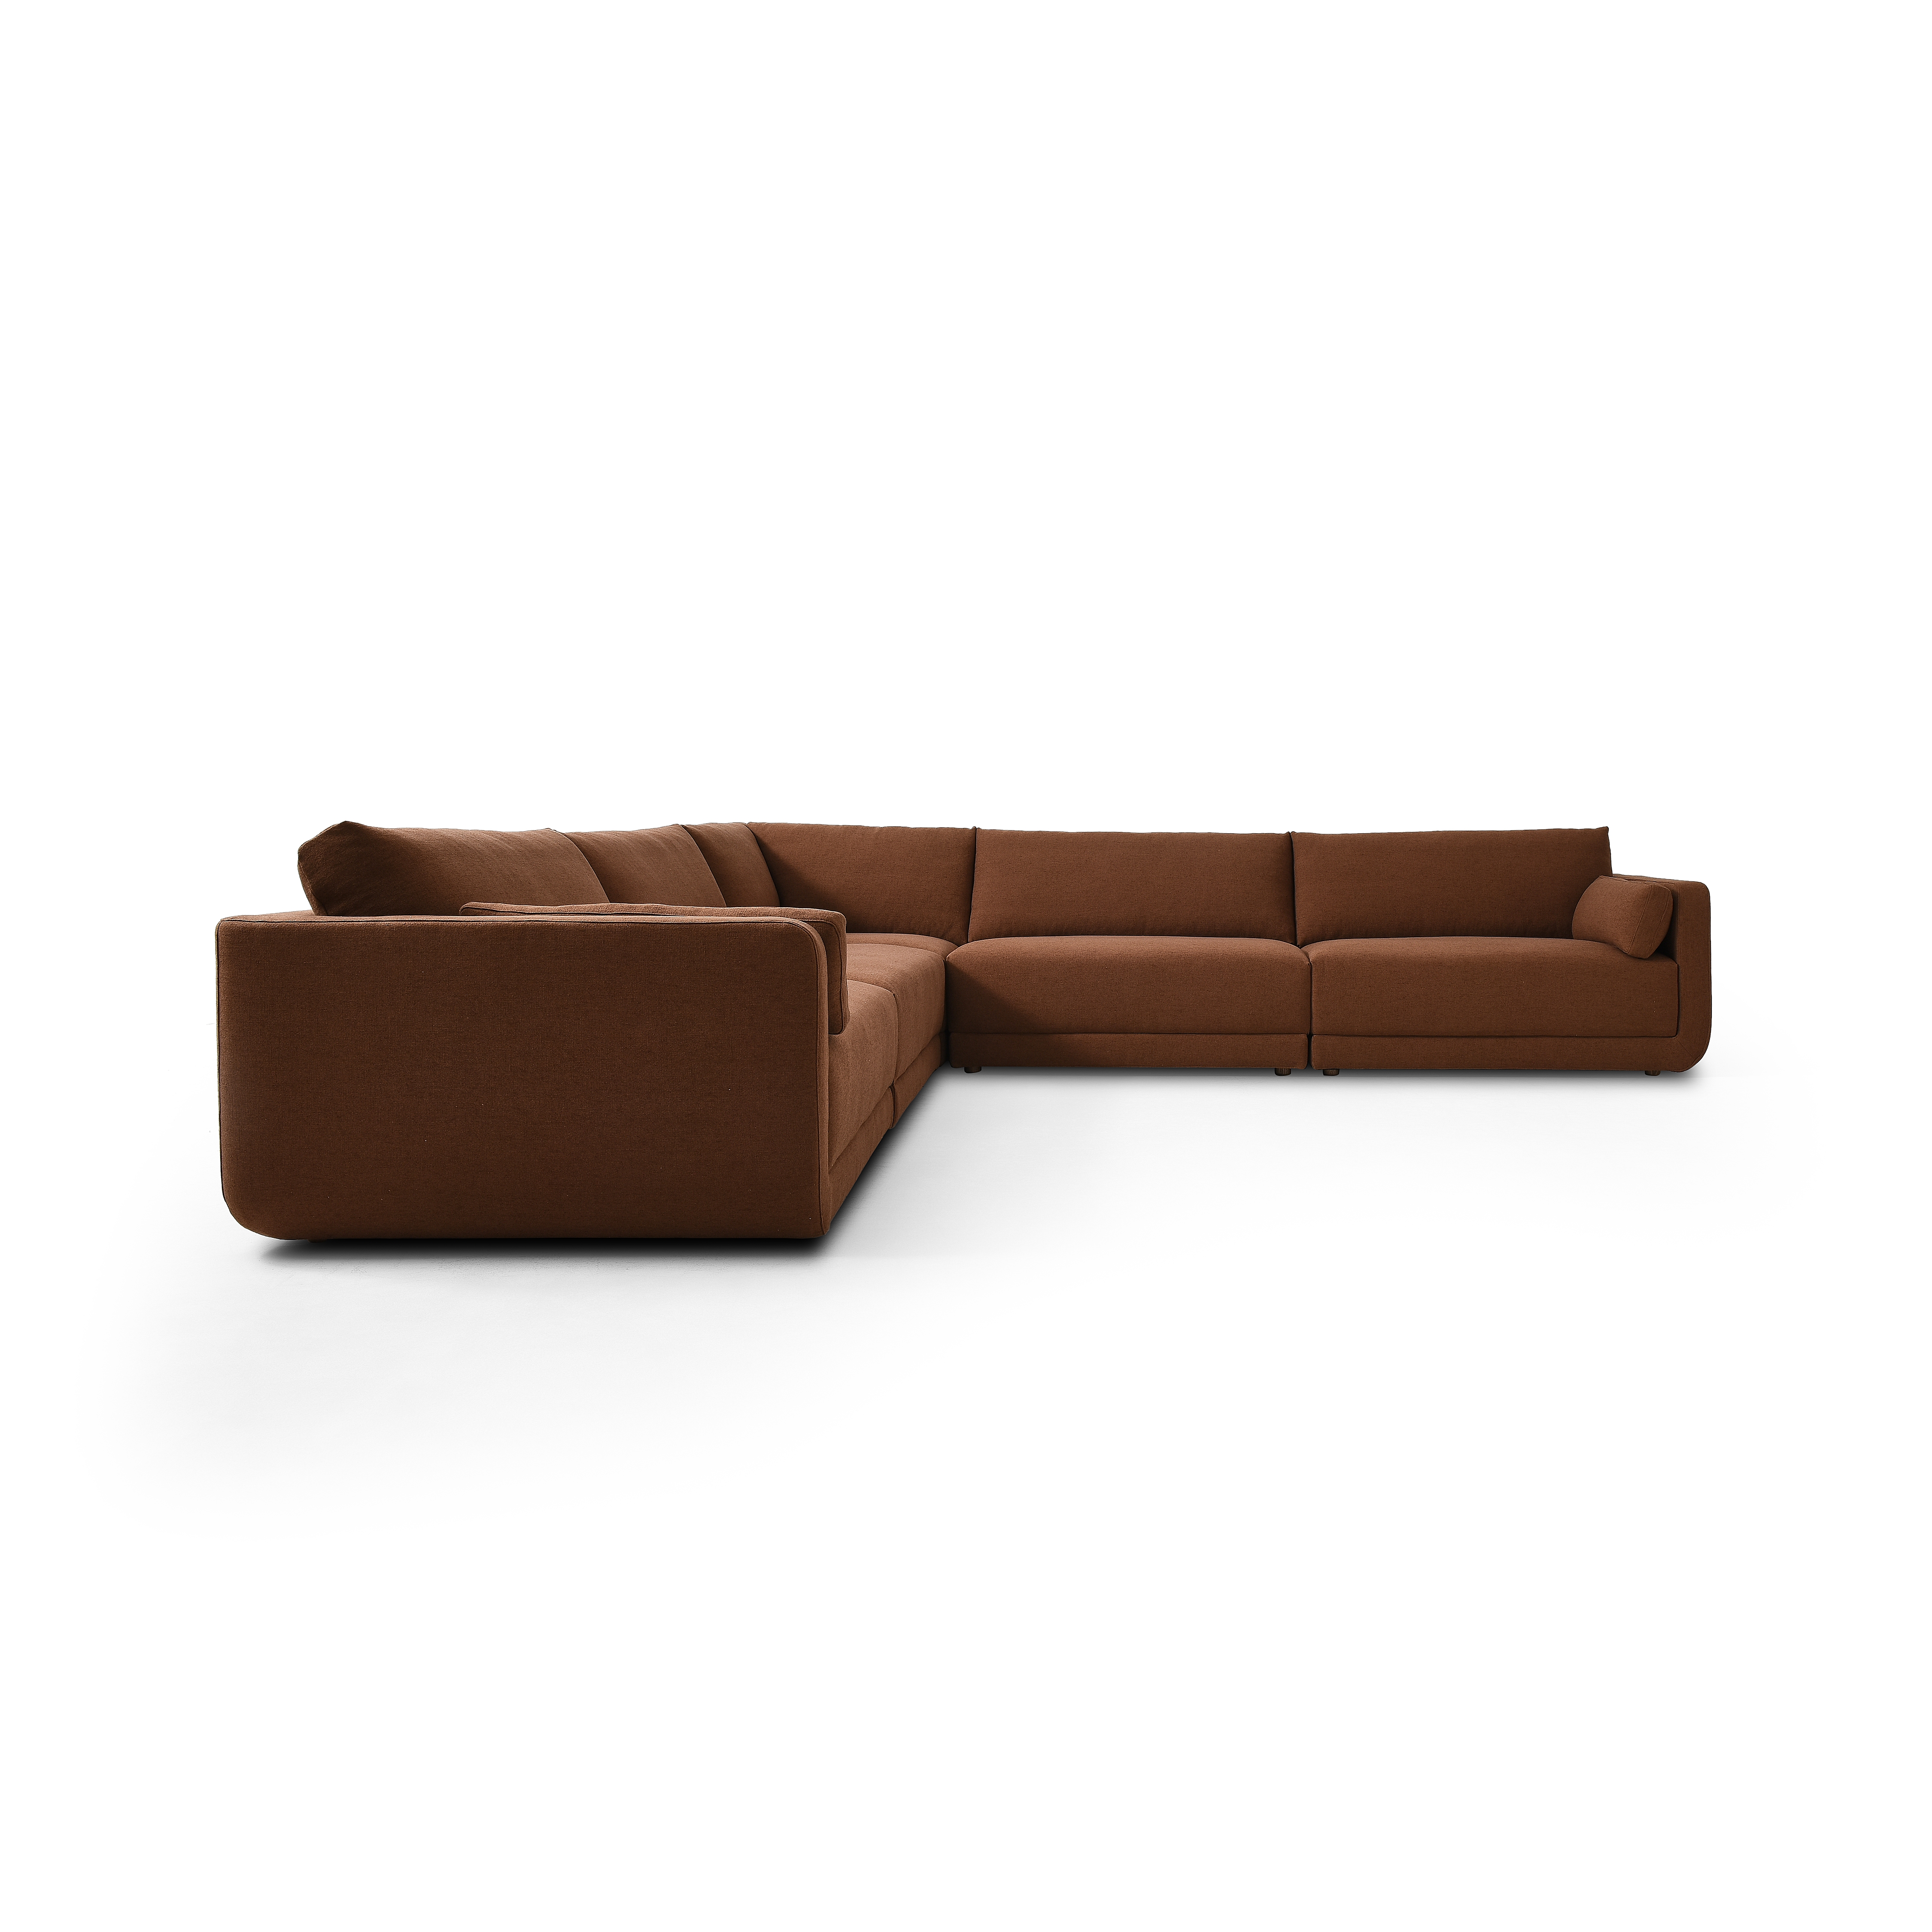 Toland 5pc Sectional-145"-Bartin Rust - Image 2